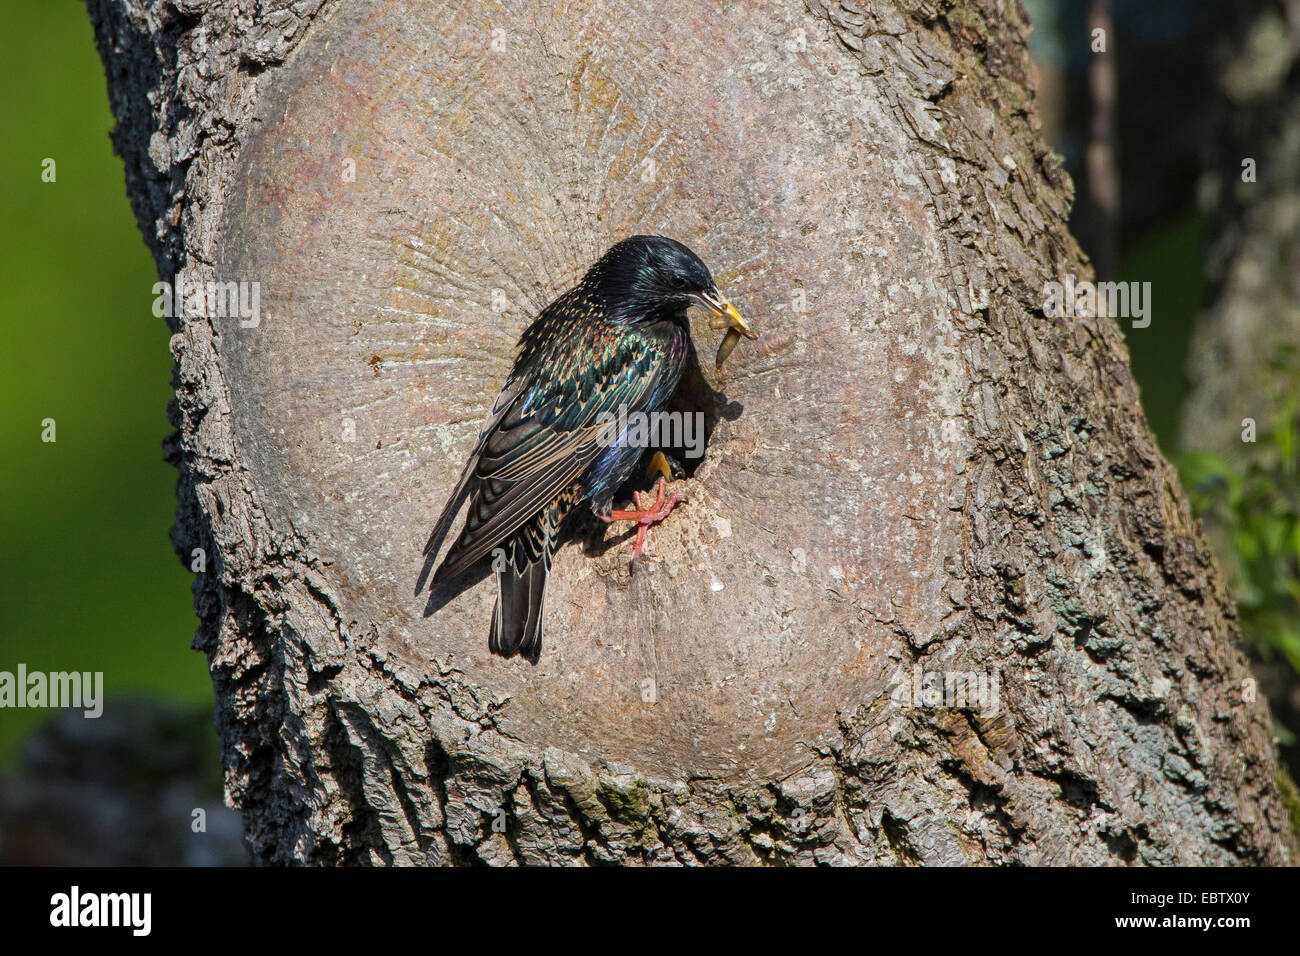 common starling (Sturnus vulgaris), at natural breeding cave with fodder, Germany Stock Photo